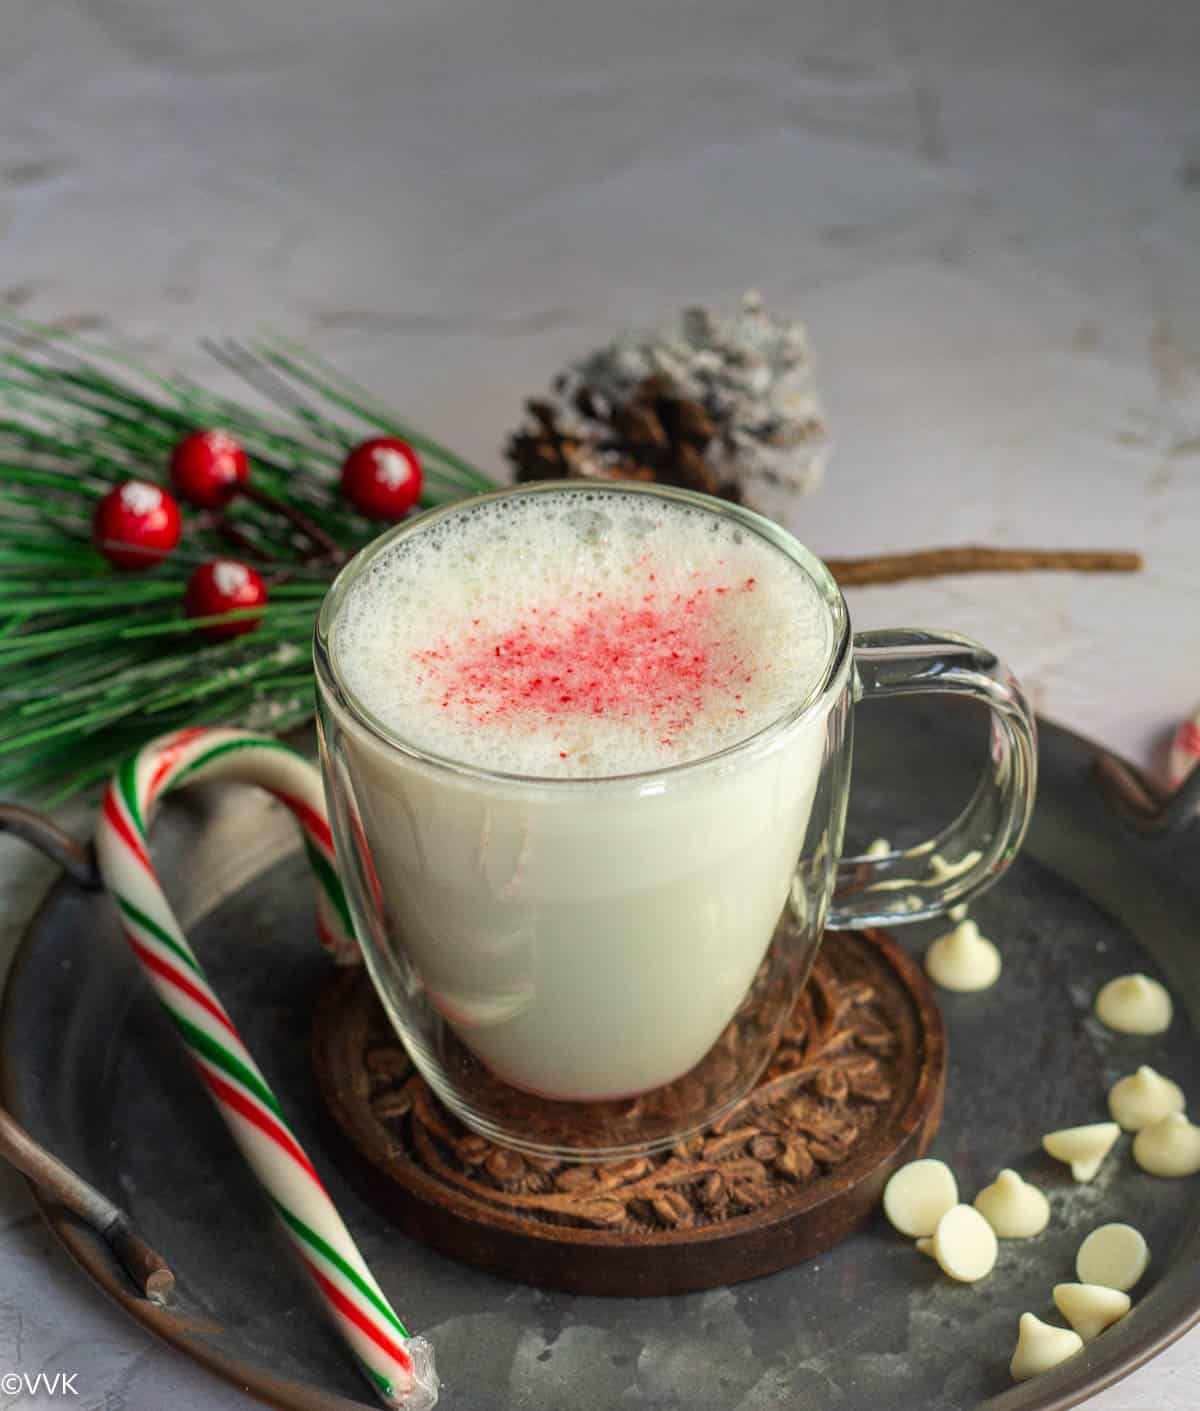 white hot chocolate served in a mug placed on a wooden coaster with some candy canes and choco chips on the side